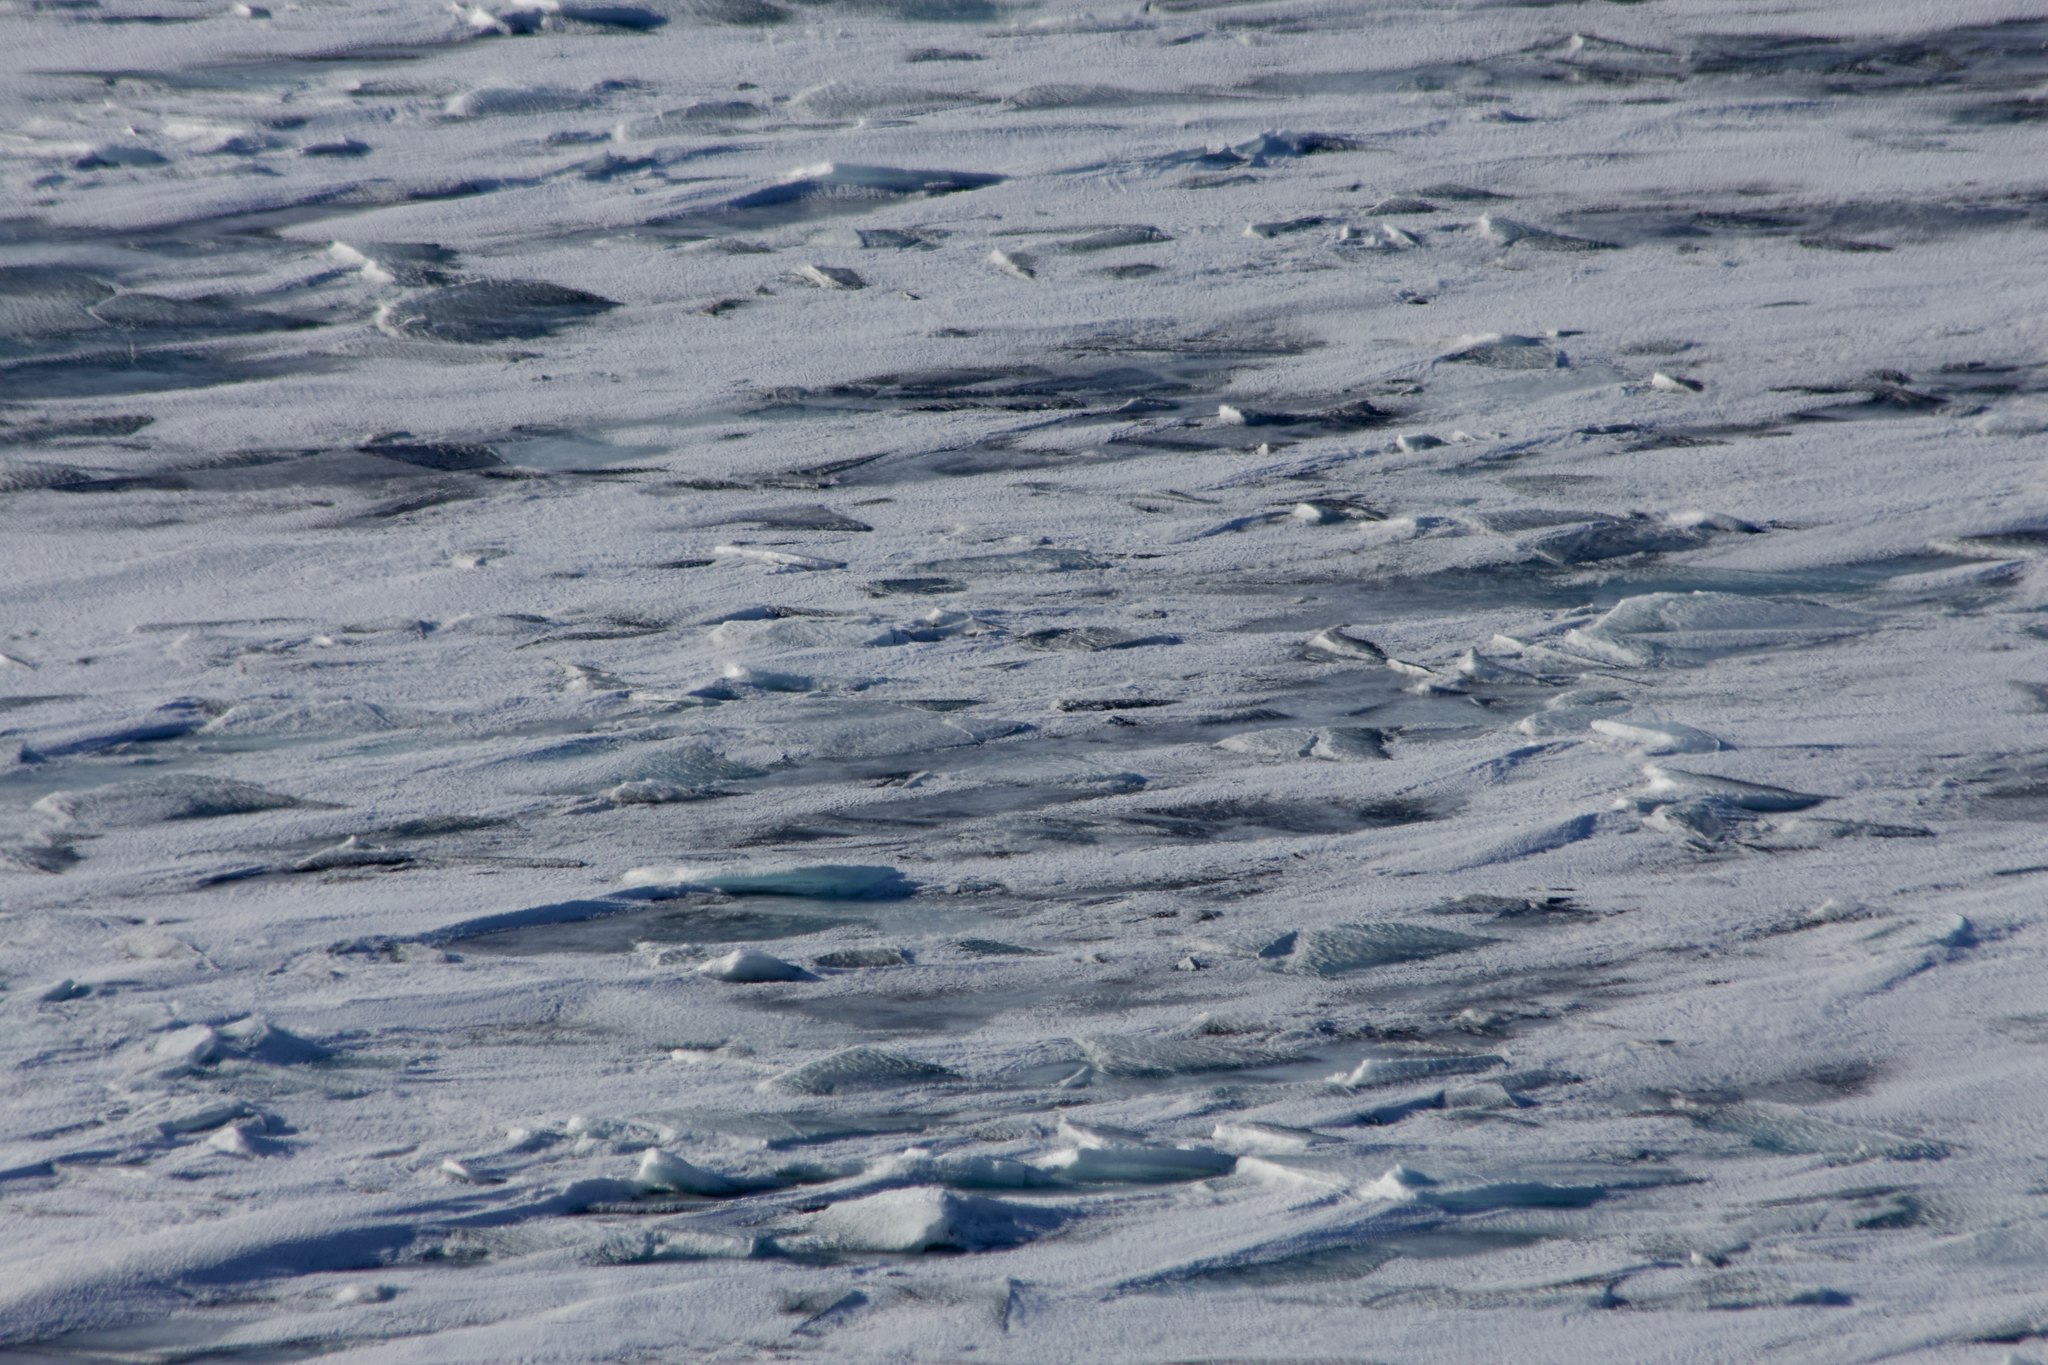 27 people rescued from floating ice chunk in Green Bay